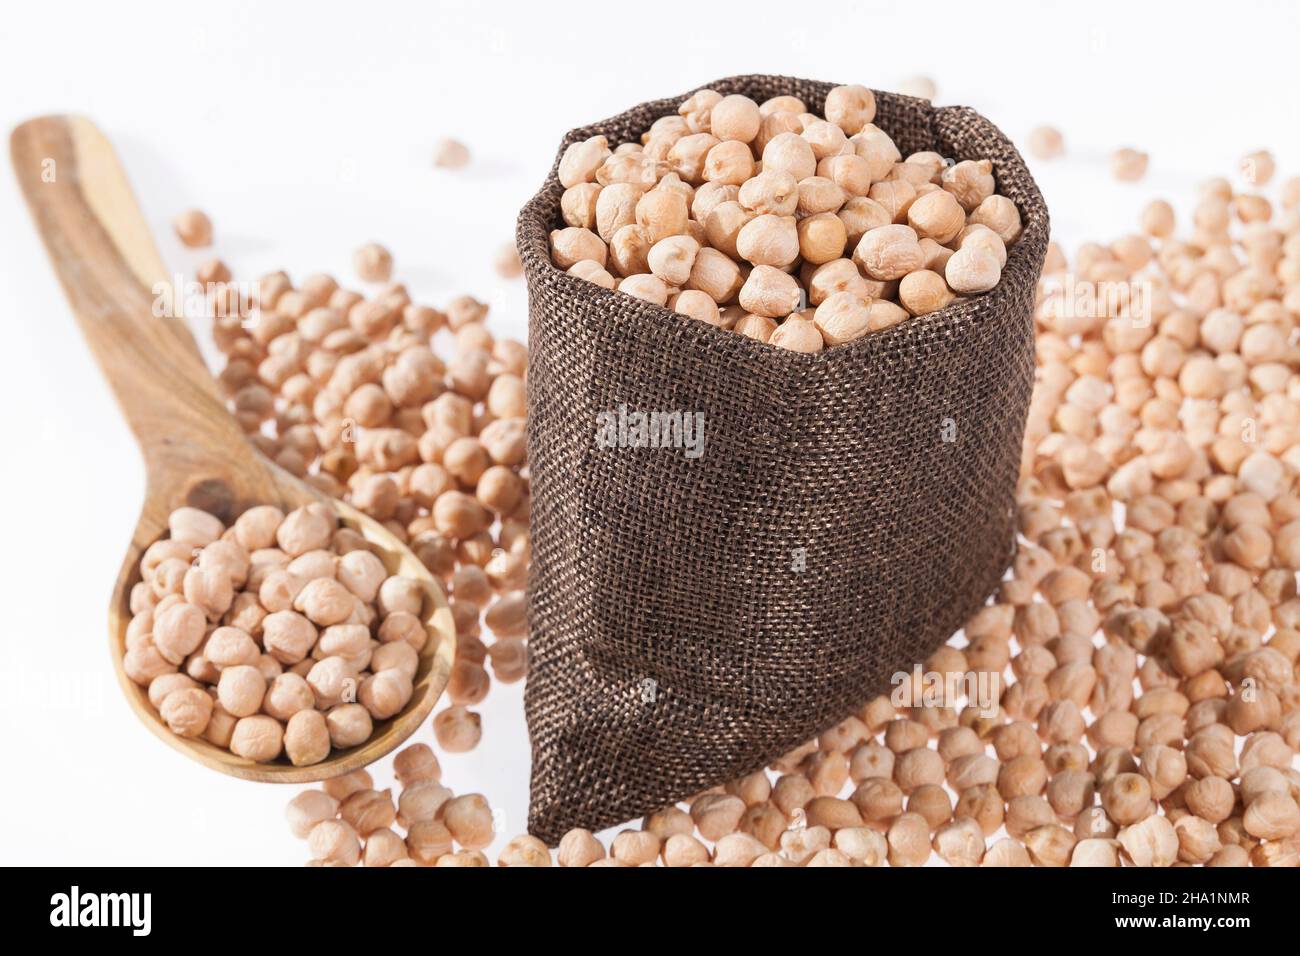 Cicer arietinum - Raw Grains Of Chickpea; Legume With Important Culinary And Nutritional Qualities Stock Photo